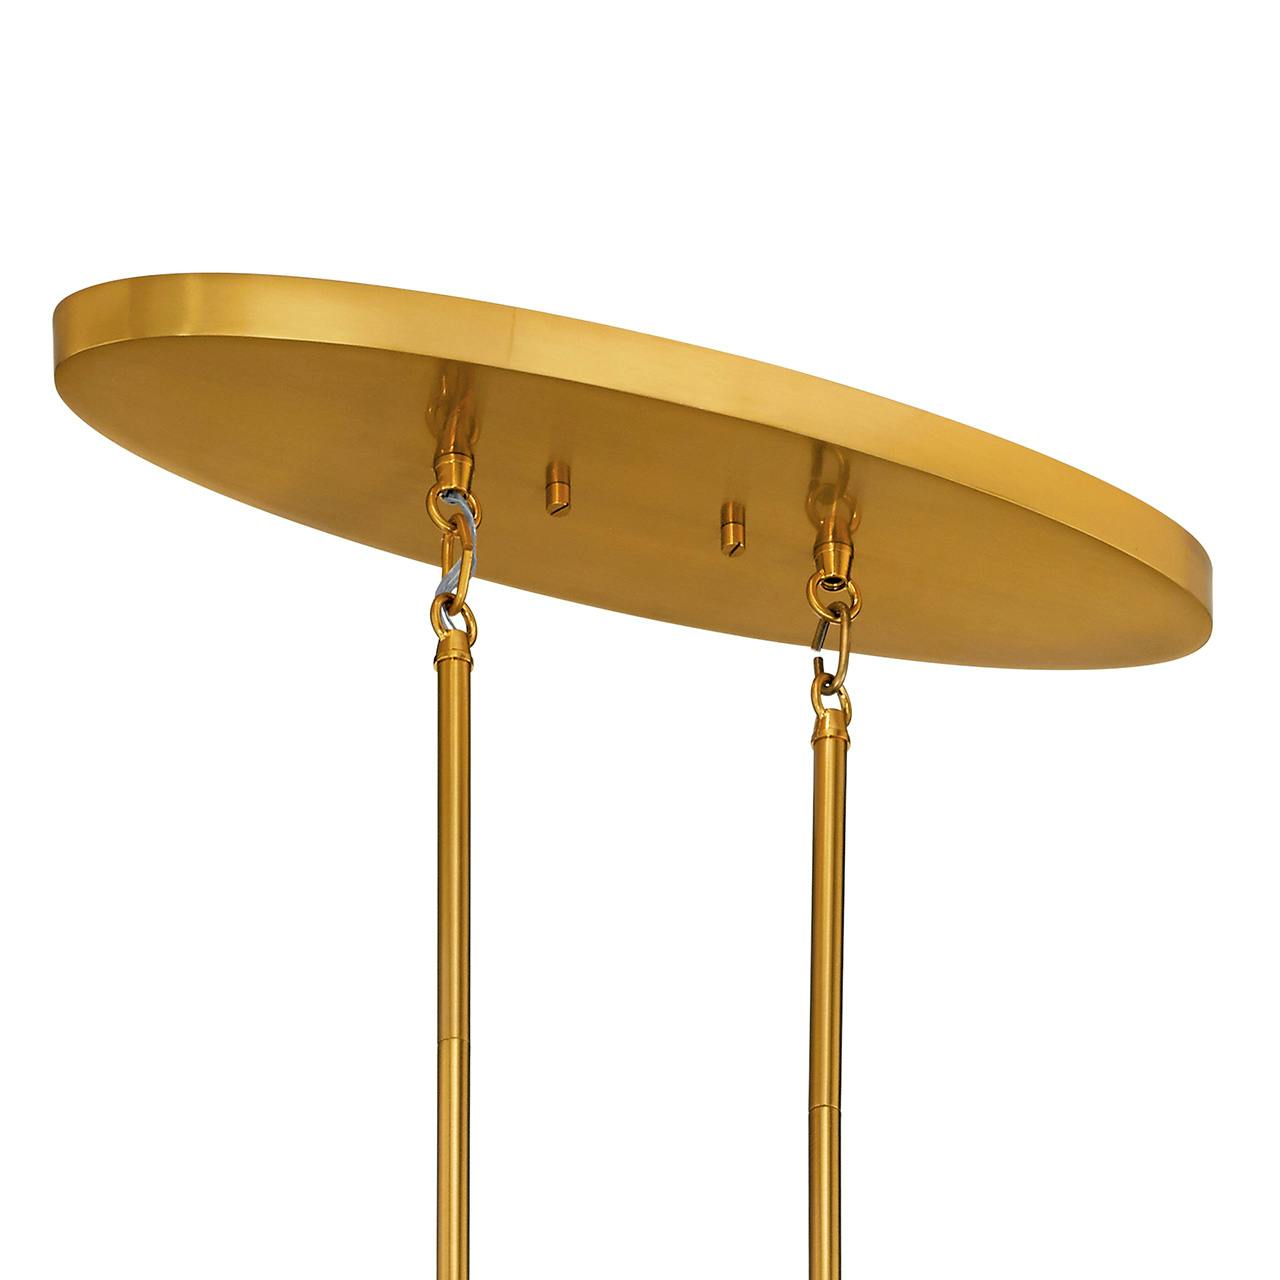 Canopy for the Pytel™ 7 Light Linear Chandelier Fox Gold on a white background